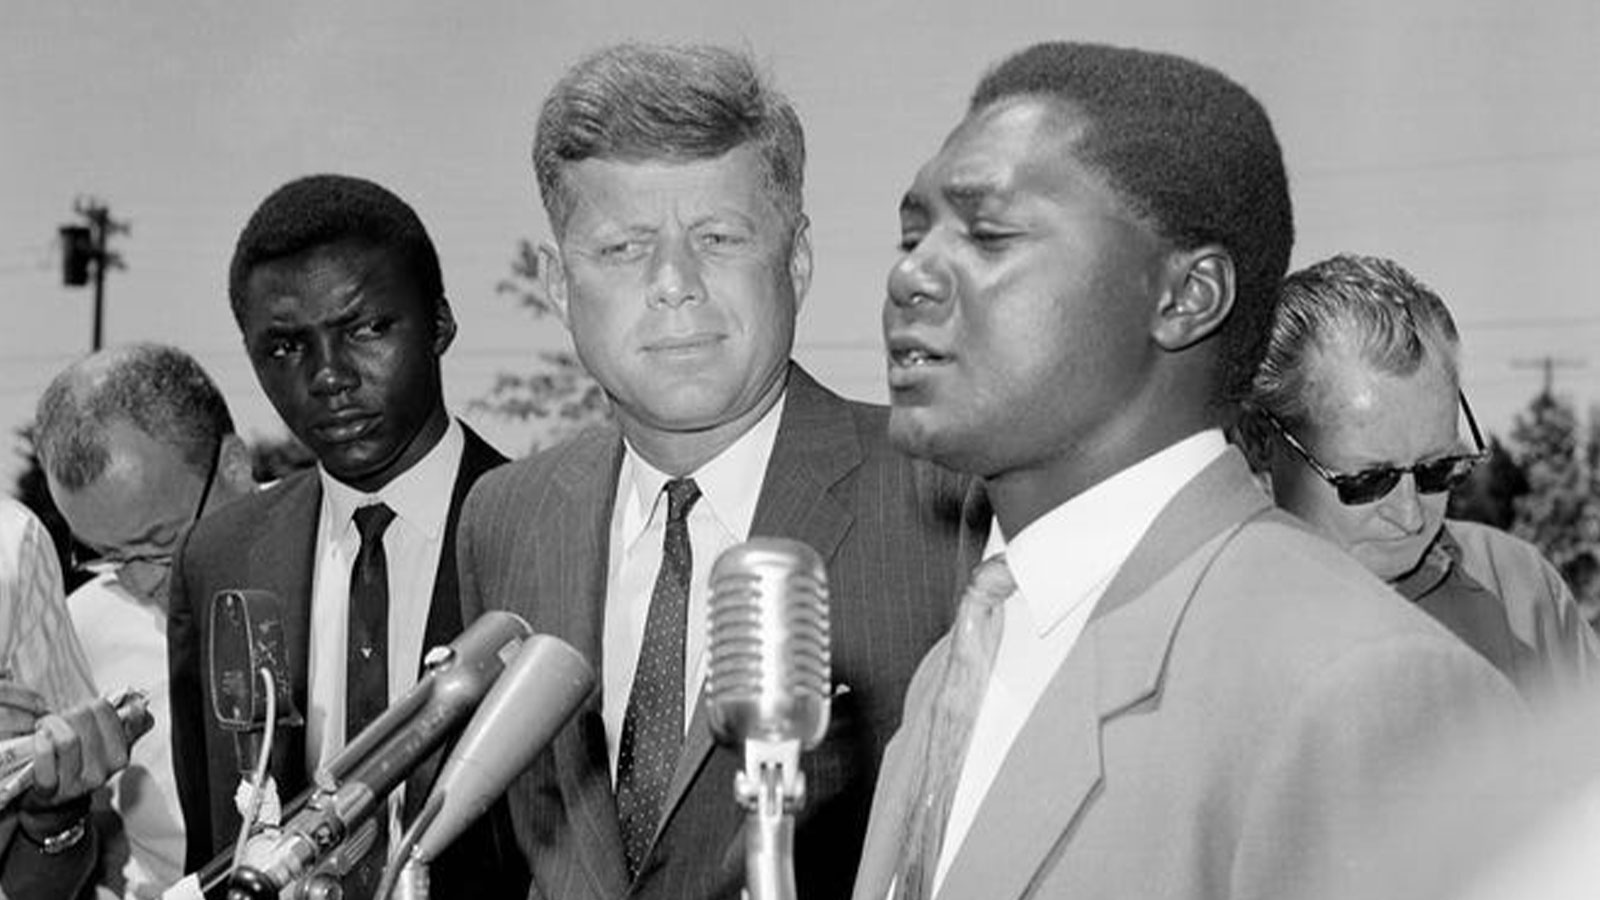 Tom Mboya and former U.S. president John F. Kennedy in late July, 1960. Kennedy was an enthusiastic booster of US-Africa relations. Congress and later his assassination essentially stalled any meaningful advancement of US-Africa relations. 